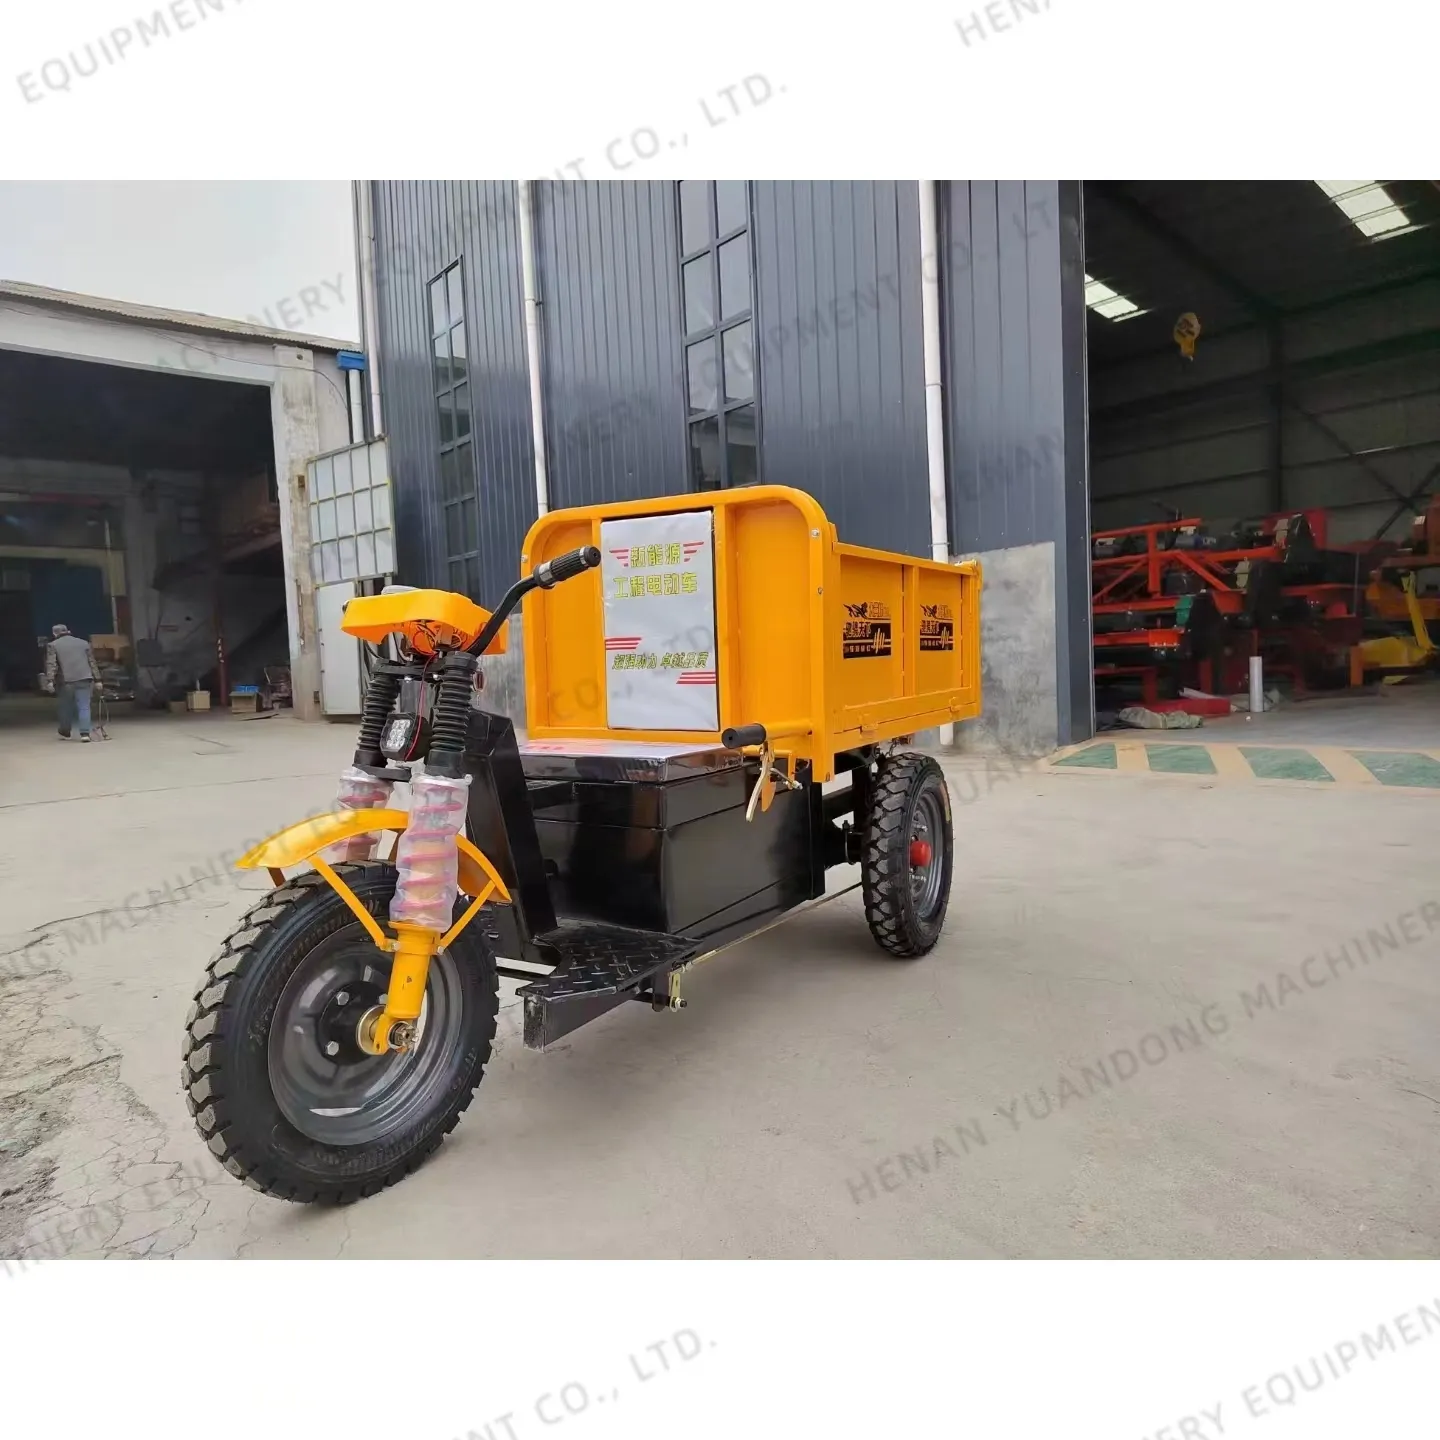 Cabin Cargo Tricycle Manufacturer Sales Stock Concrete Motorcycle Three Wheels